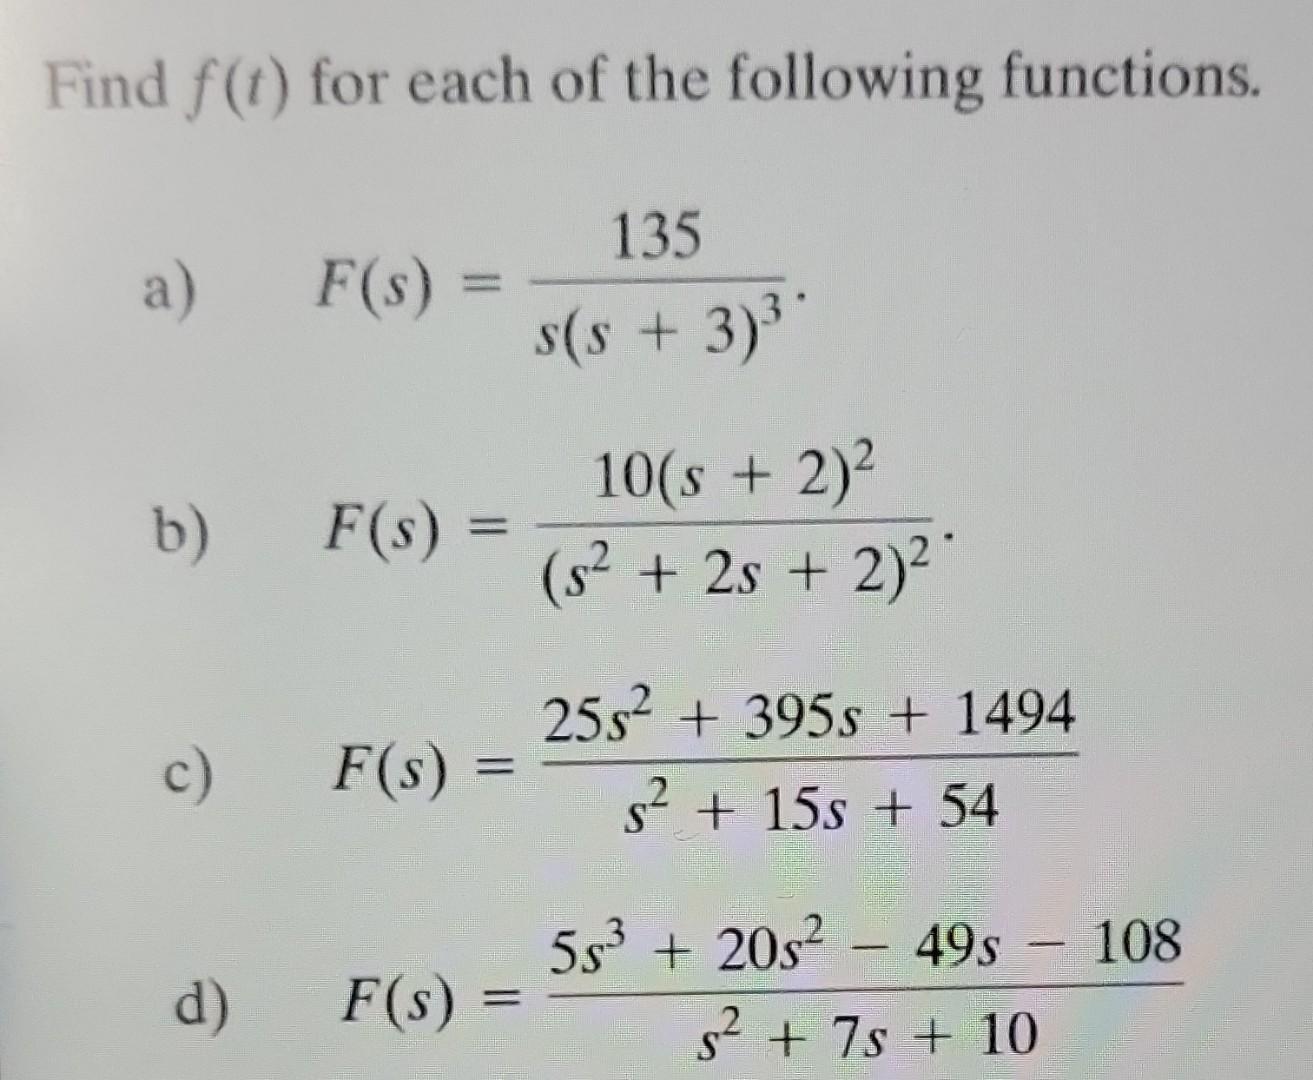 Find f(t) for each of the following functions. a) F(s) = b) c) d) F(s) = F(s) = F(s) = = 135 s(s+3)* 10(s +